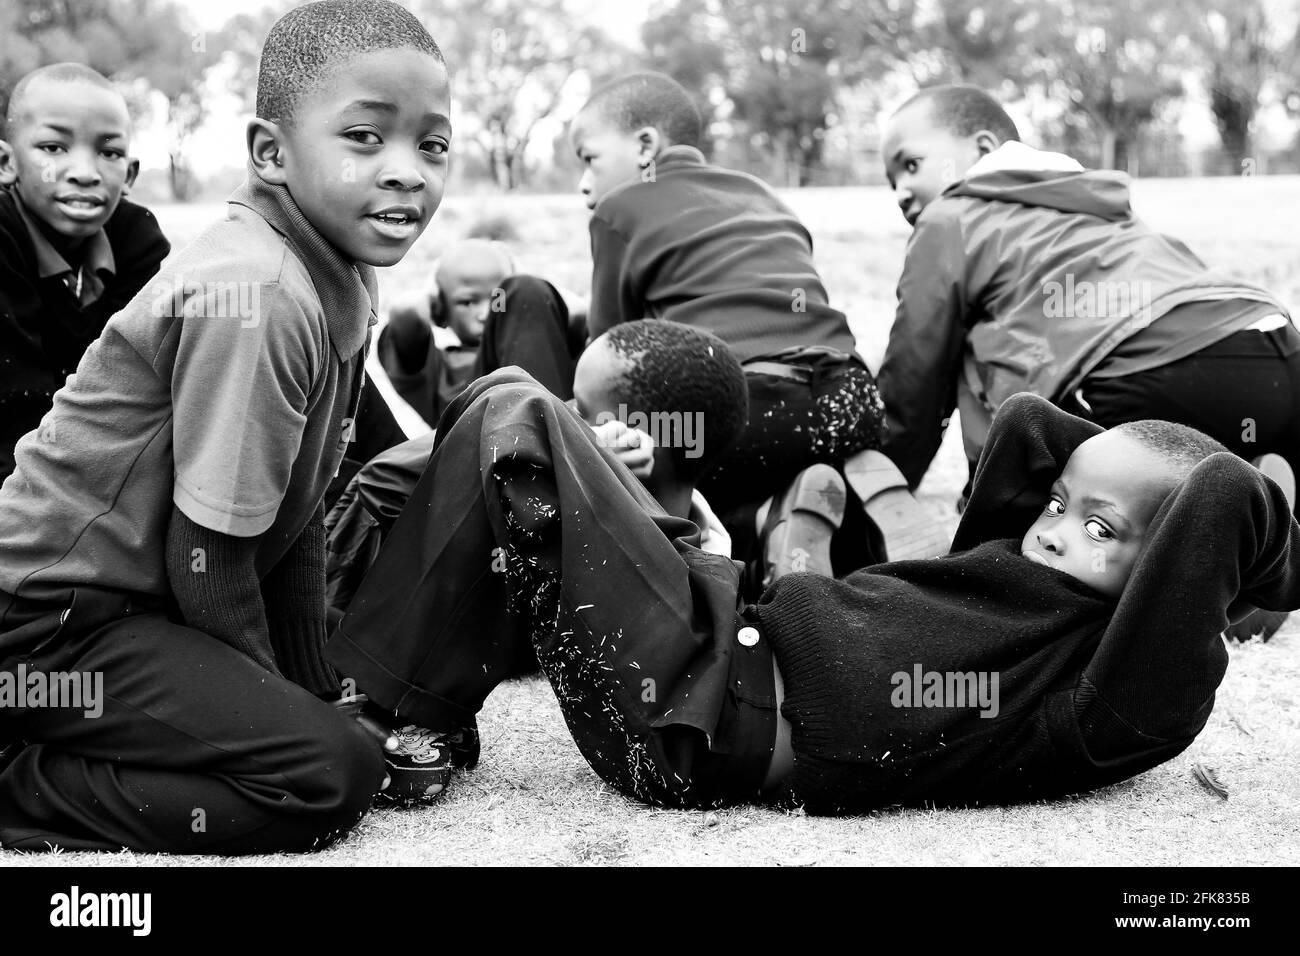 JOHANNESBURG, SOUTH AFRICA - Mar 13, 2021: Johannesburg, South Africa - October 14 2010: Diverse African Primary School children doing physical exerci Stock Photo